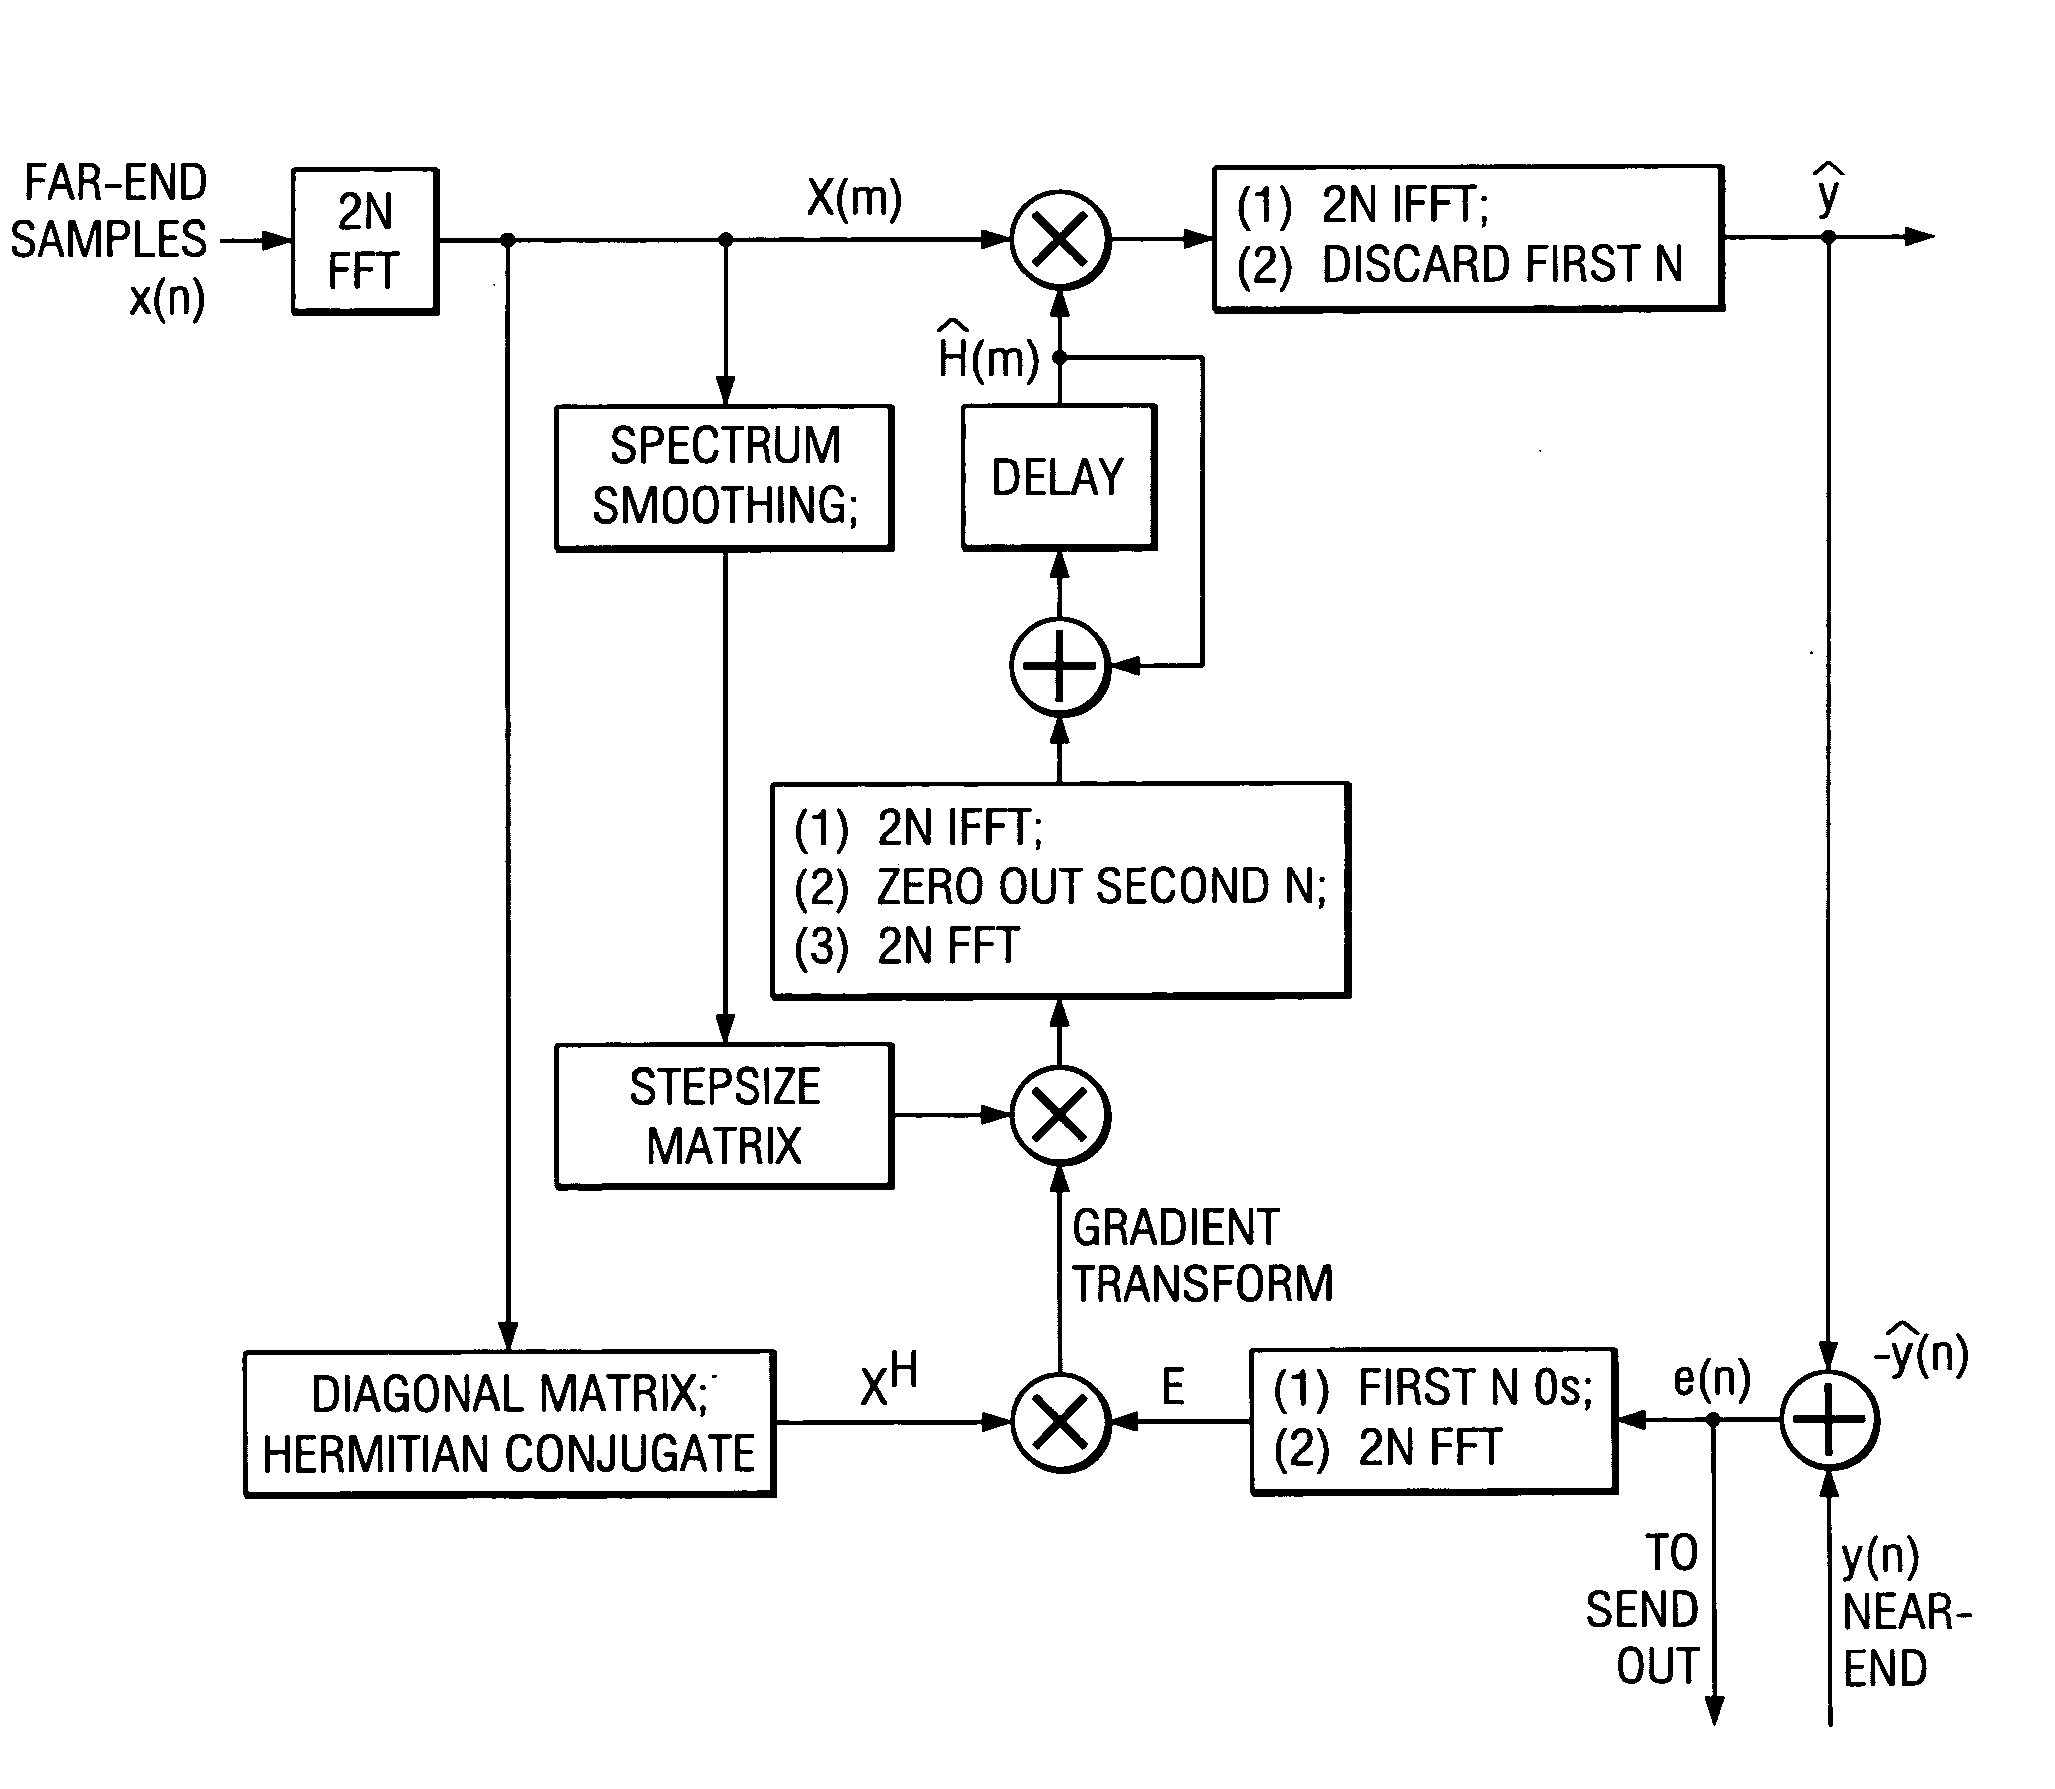 Acoustic echo devices and methods